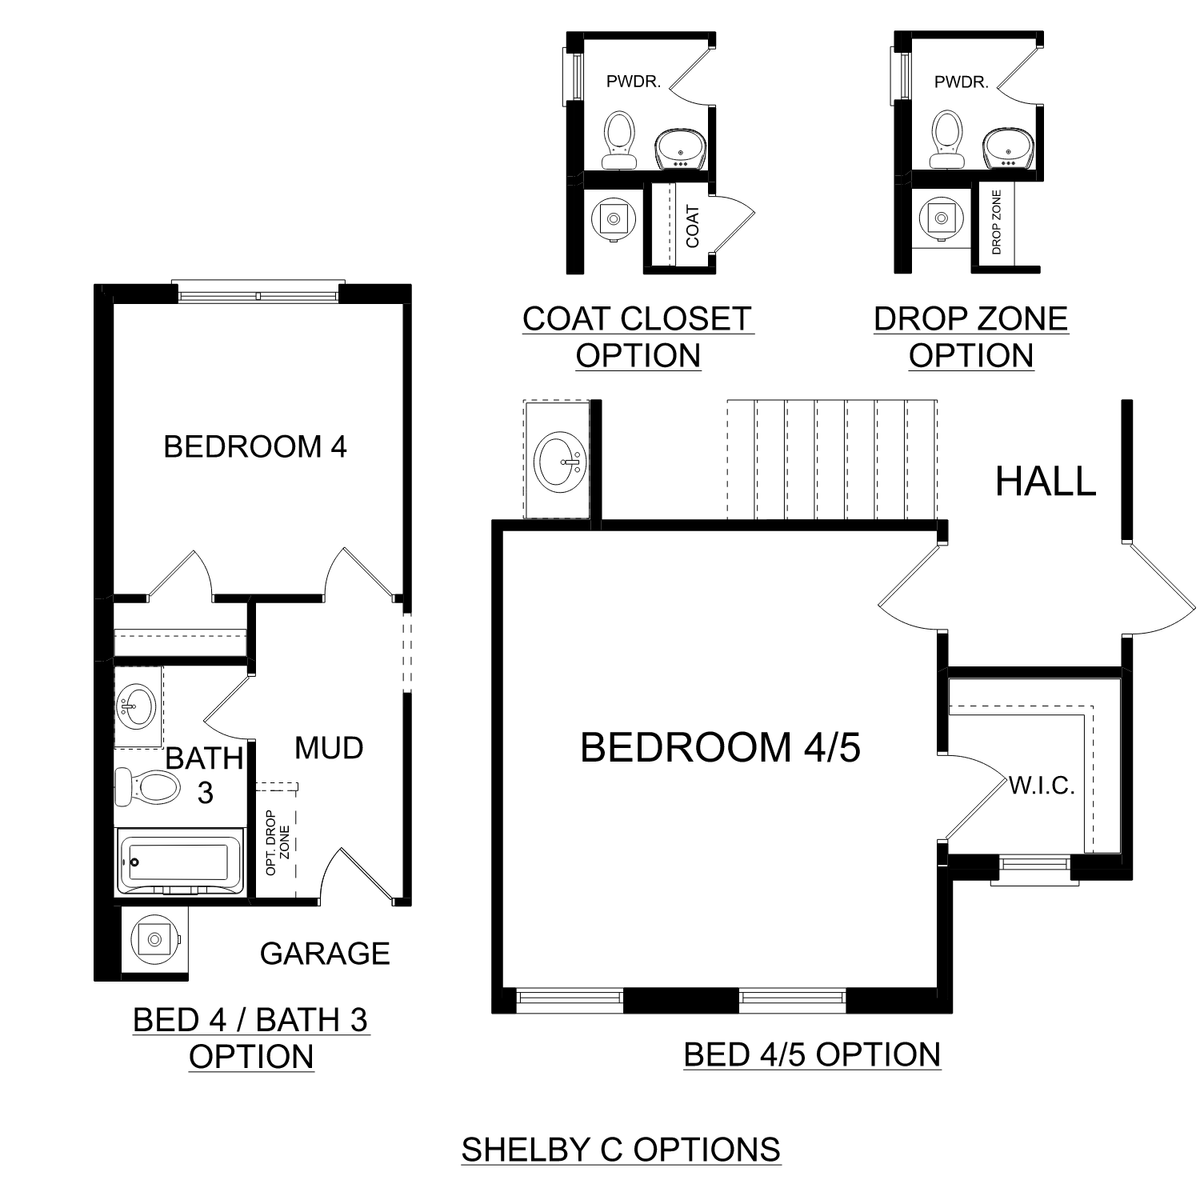 3 - The Shelby C - Side Entry floor plan layout for 307 Creek Grove Avenue in Davidson Homes' Creek Grove community.